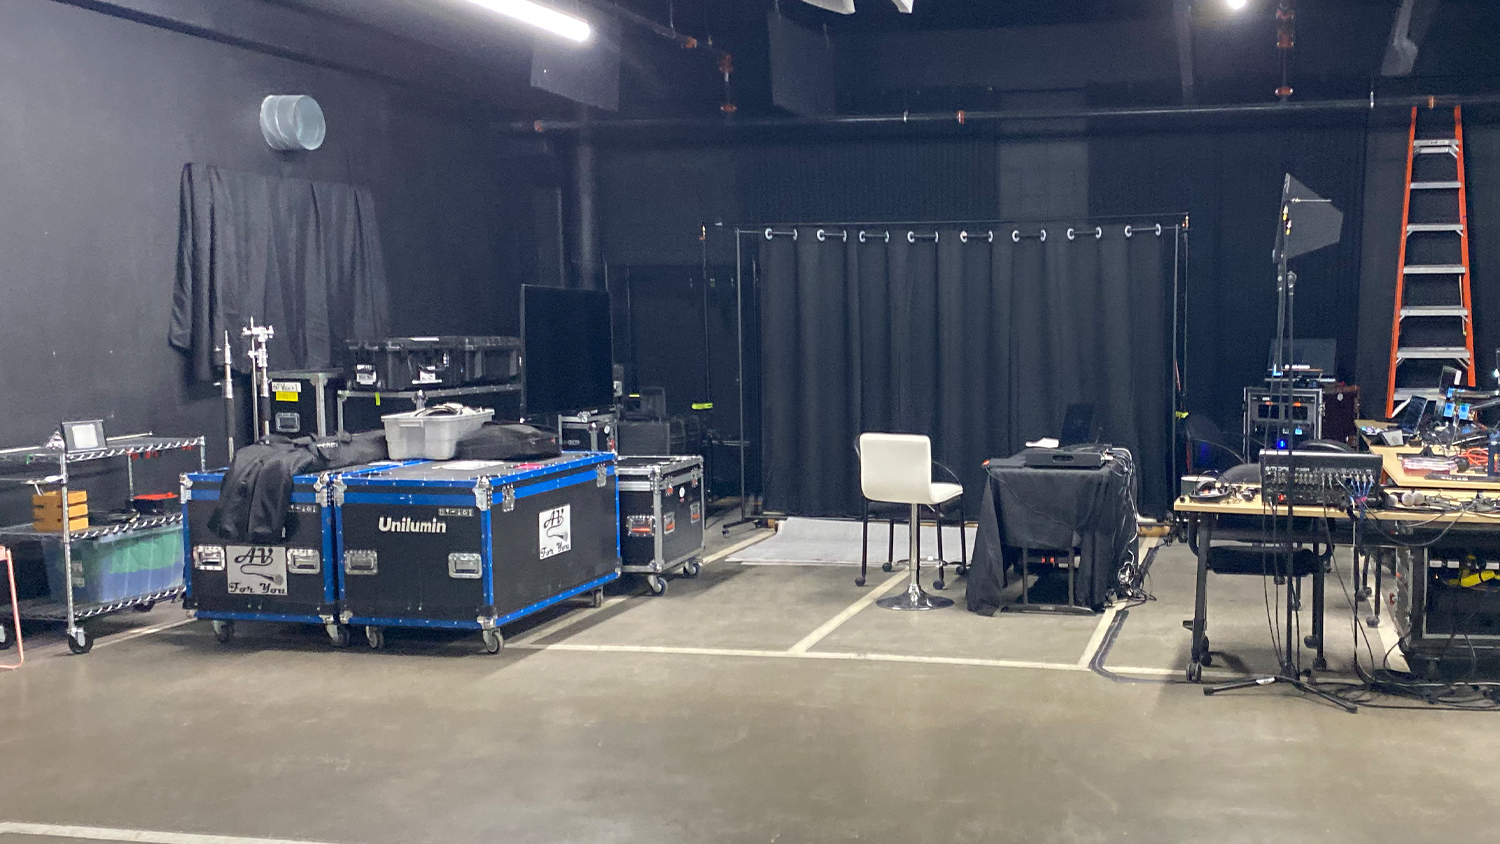 Crew gear stored for expanded production at Rockstoria Studios Flexible Studio Rental Production St. Paul MN Twin Cities.